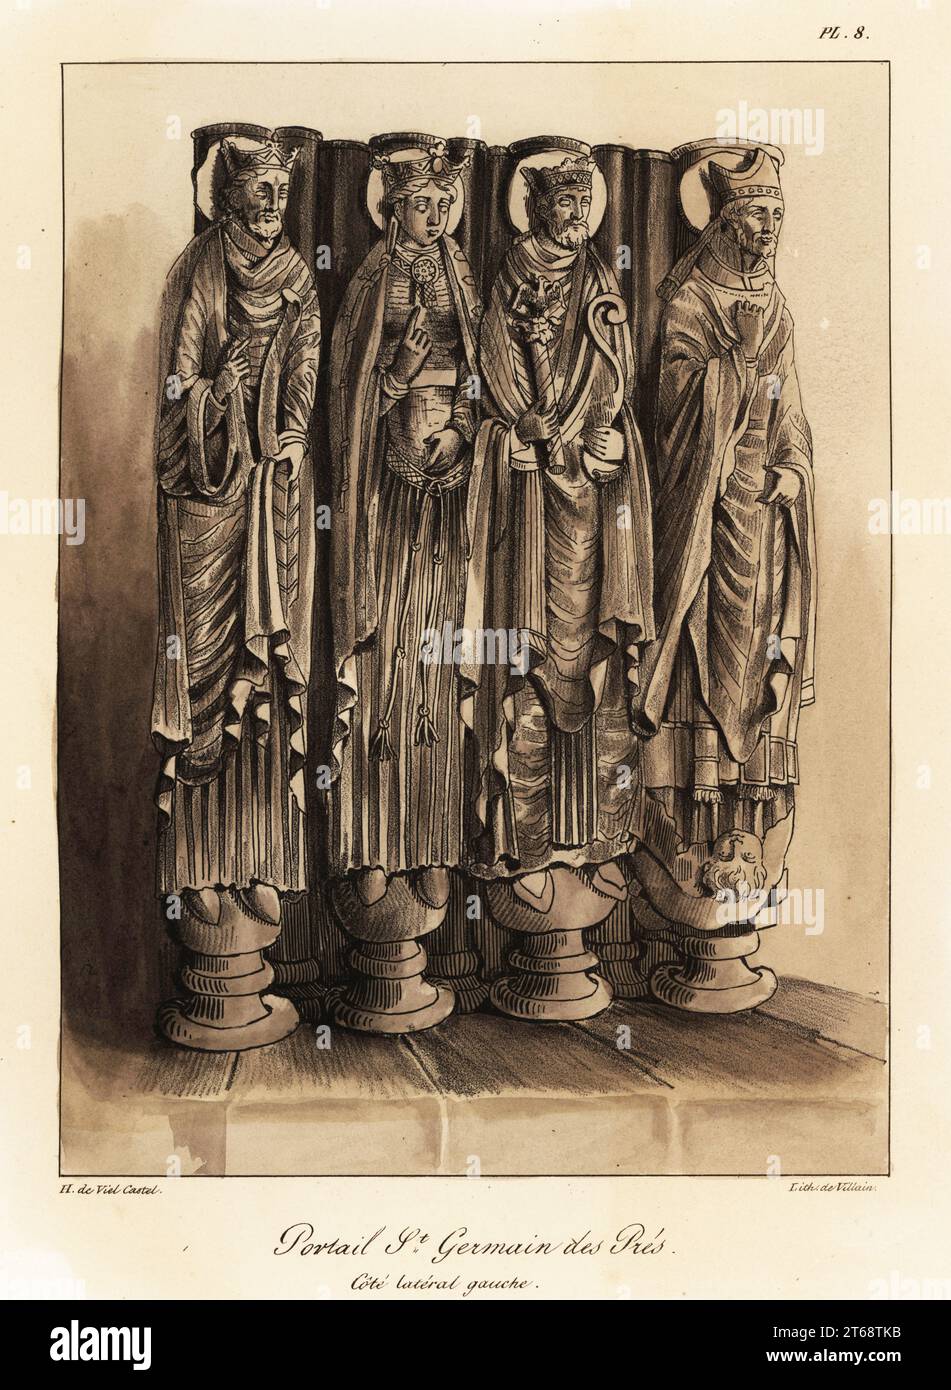 Portal of the Abbey of St. Germain de Pres, Paris, with statues of the Frankish king Clovis, princess Clotilde, and two Merovingian princes. Portail St. Germain des Pres, cote lateral gauche. Tinted lithograph by Villain after an illustration by Horace de Viel-Castel from his Collection des costumes, armes et meubles pour servir à l'histoire de la France (Collection of costumes, weapons and furniture to be used in the history of France), Treuttel & Wurtz, Bossange, 1827. Stock Photo